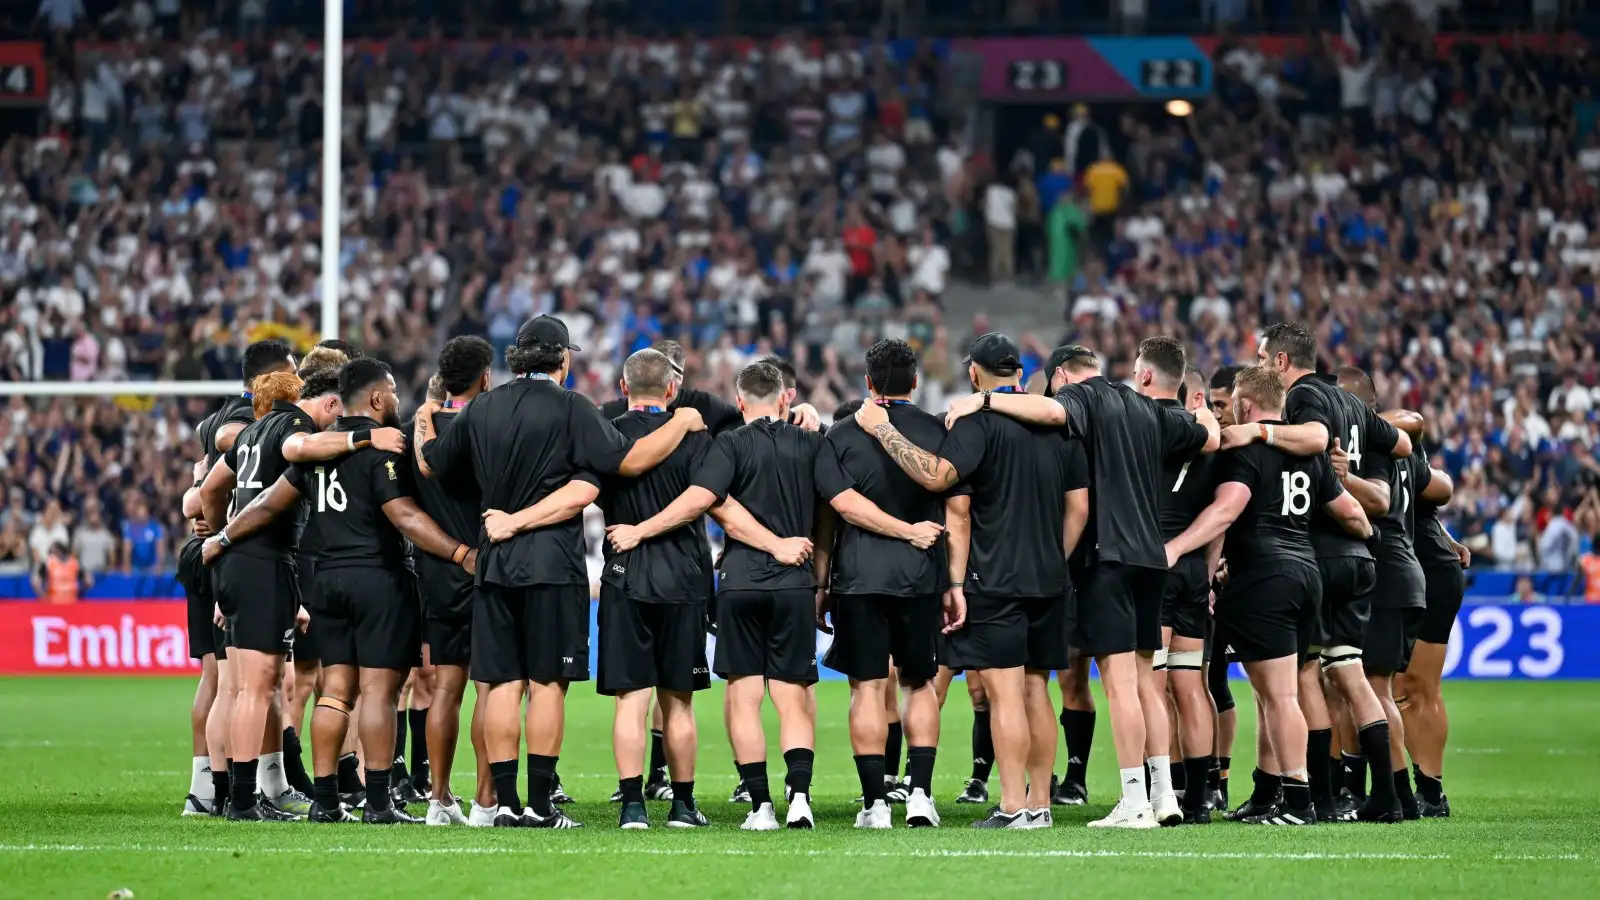 The All Blacks huddle after playing against France at the Rugby World Cup.